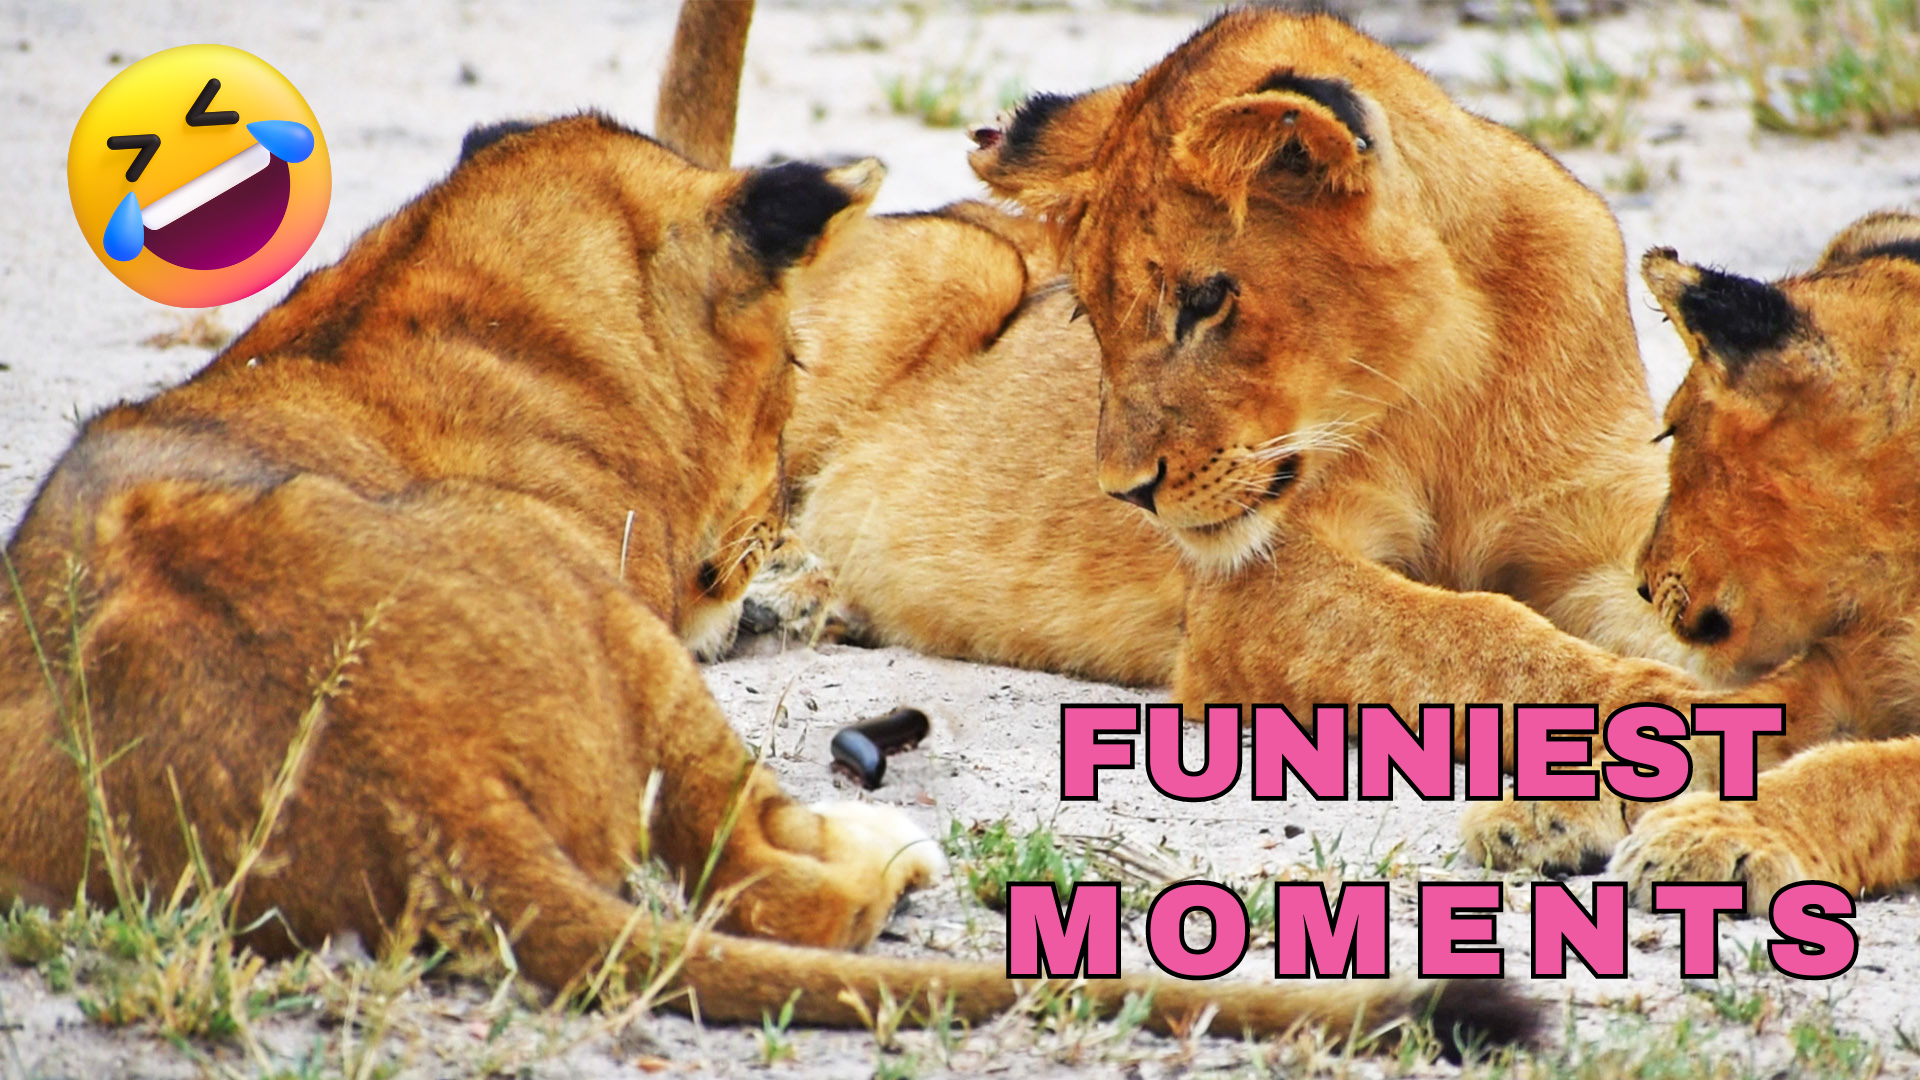 Hilarious Wild Lions Caught on Camera